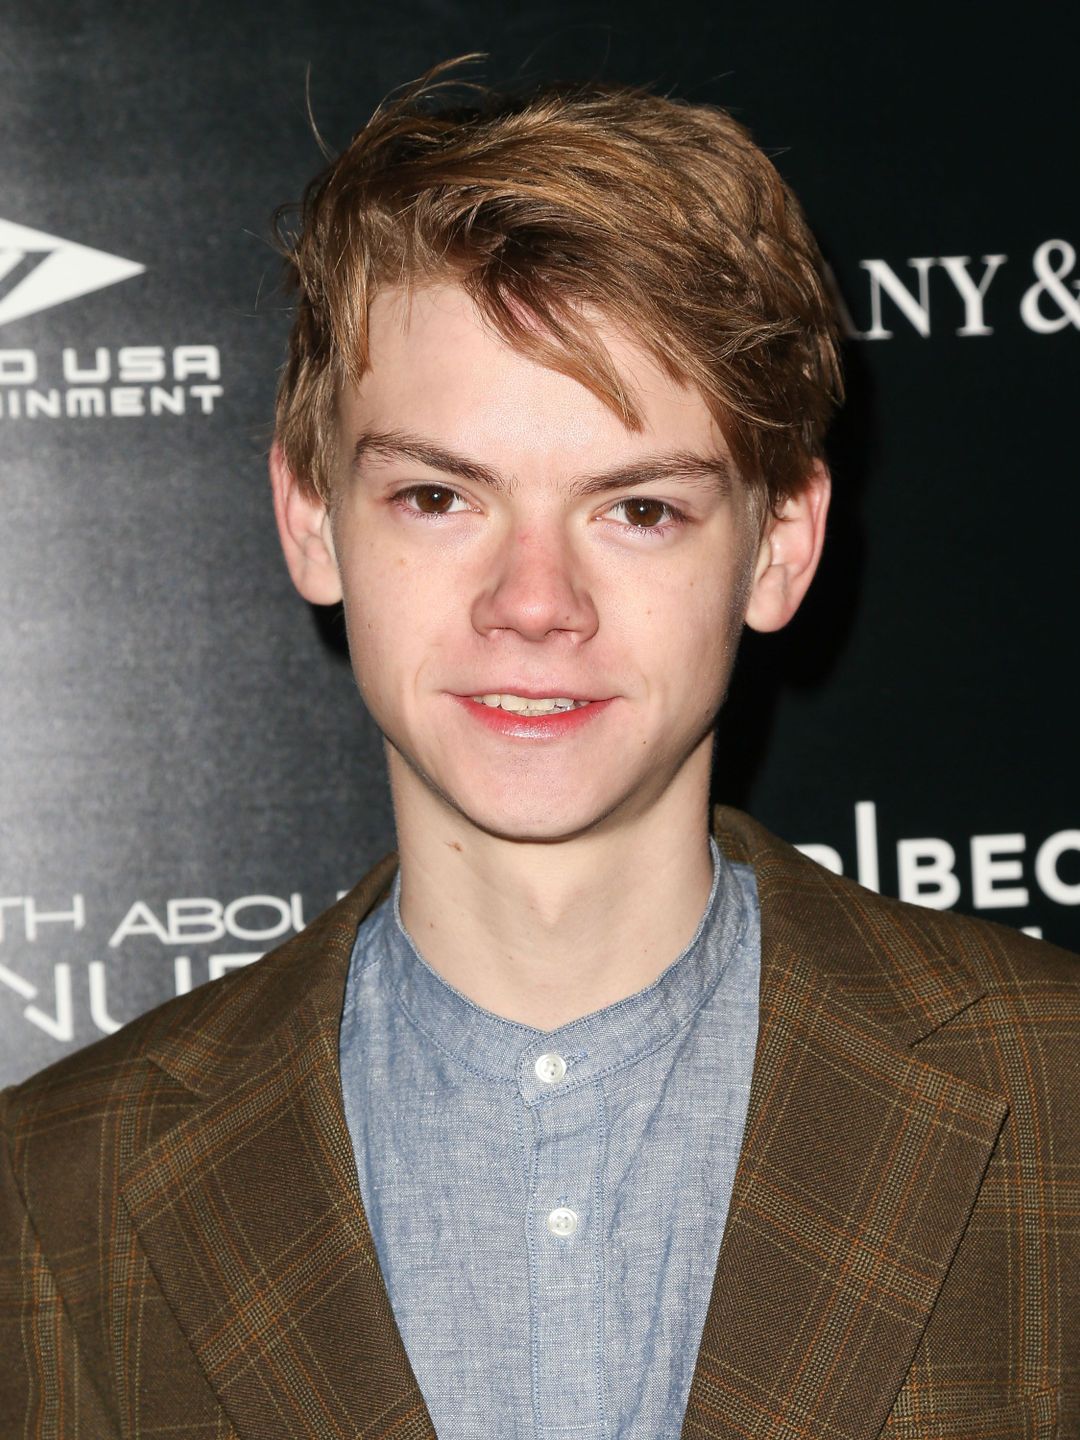 Thomas Sangster story of success